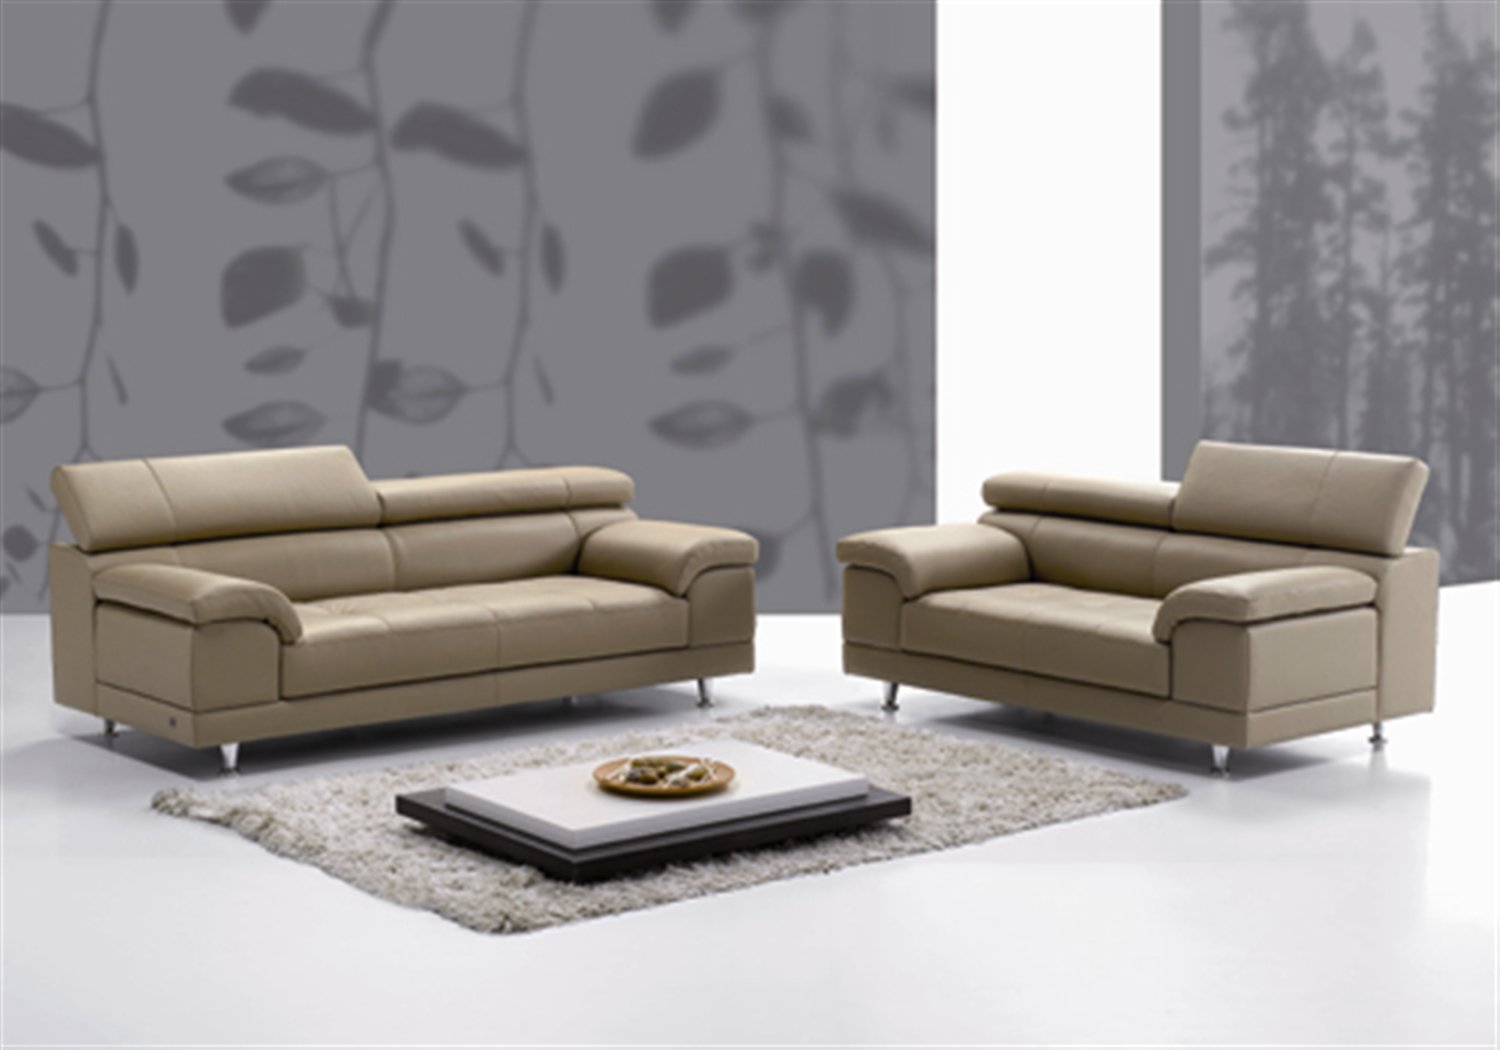 Italian Leather Sofa, Affordable and Quality from Piquattro